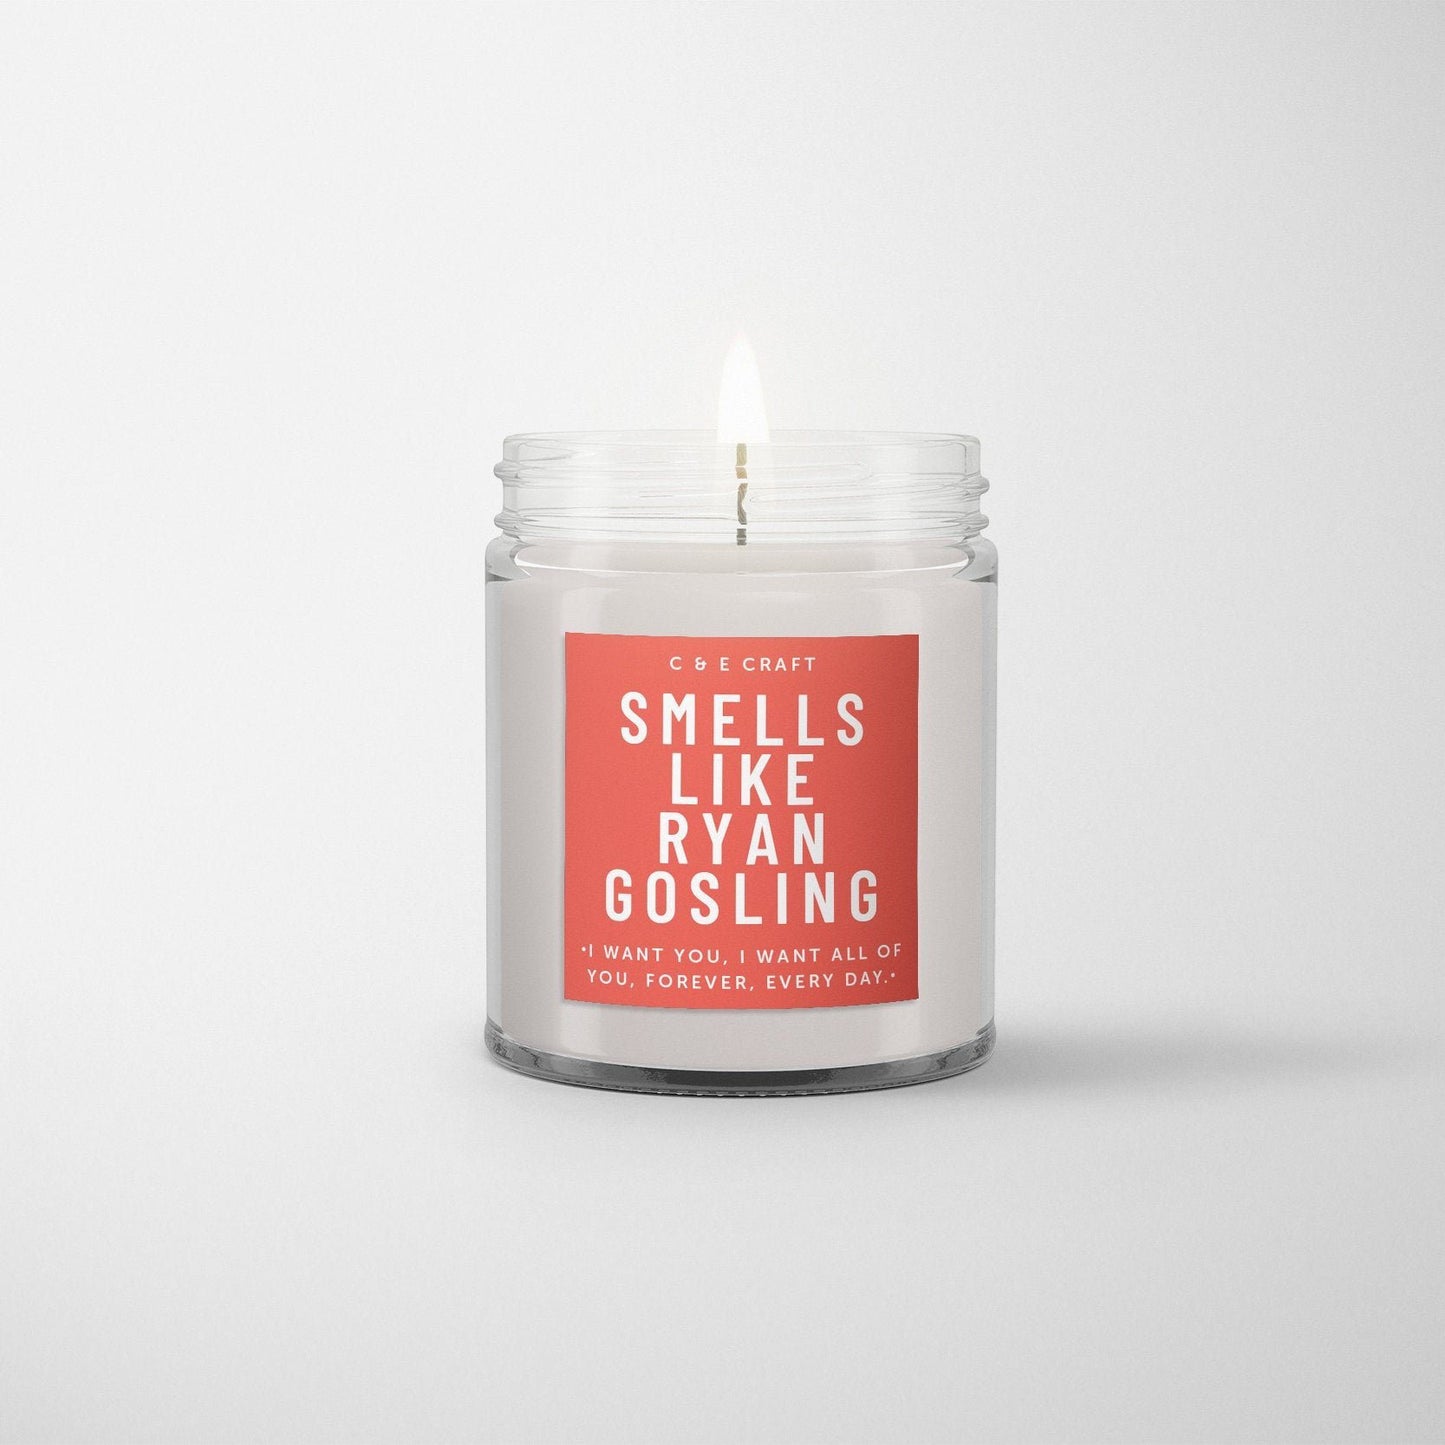 C&E - Smells Like Ryan Gosling Soy Wax Candle - Smells Like Candle - Gift for Her C & E Craft Co 